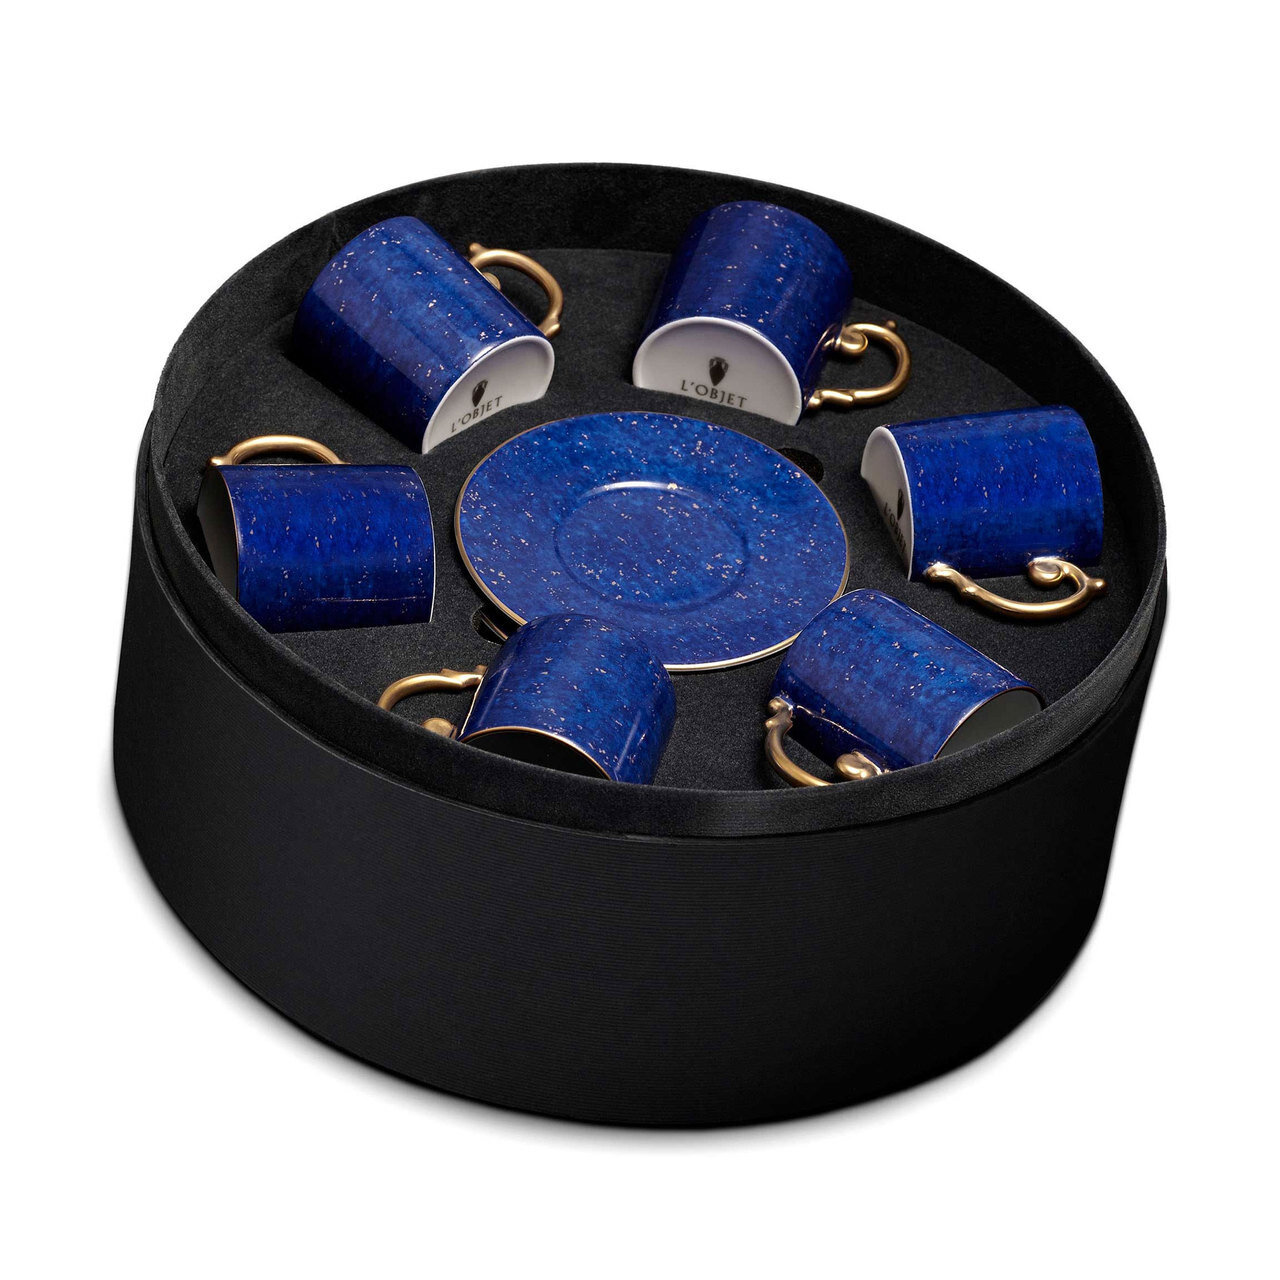 L'Objet Lapis Espresso Cup and Saucer Gift Box of 6